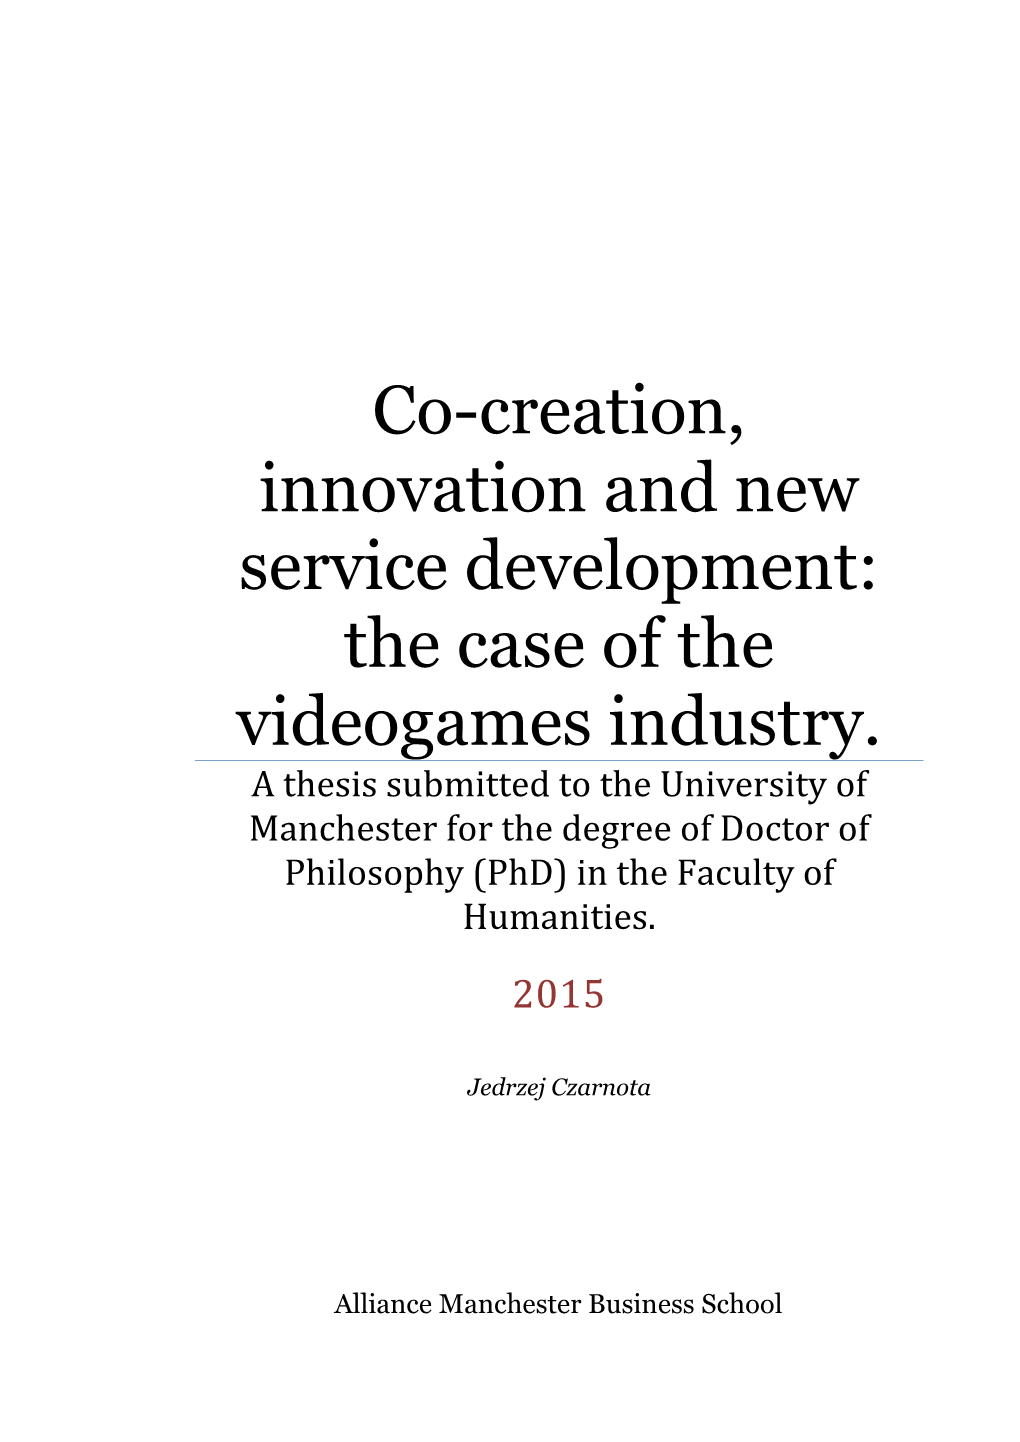 Co-Creation, Innovation and New Service Development: the Case of the Videogames Industry